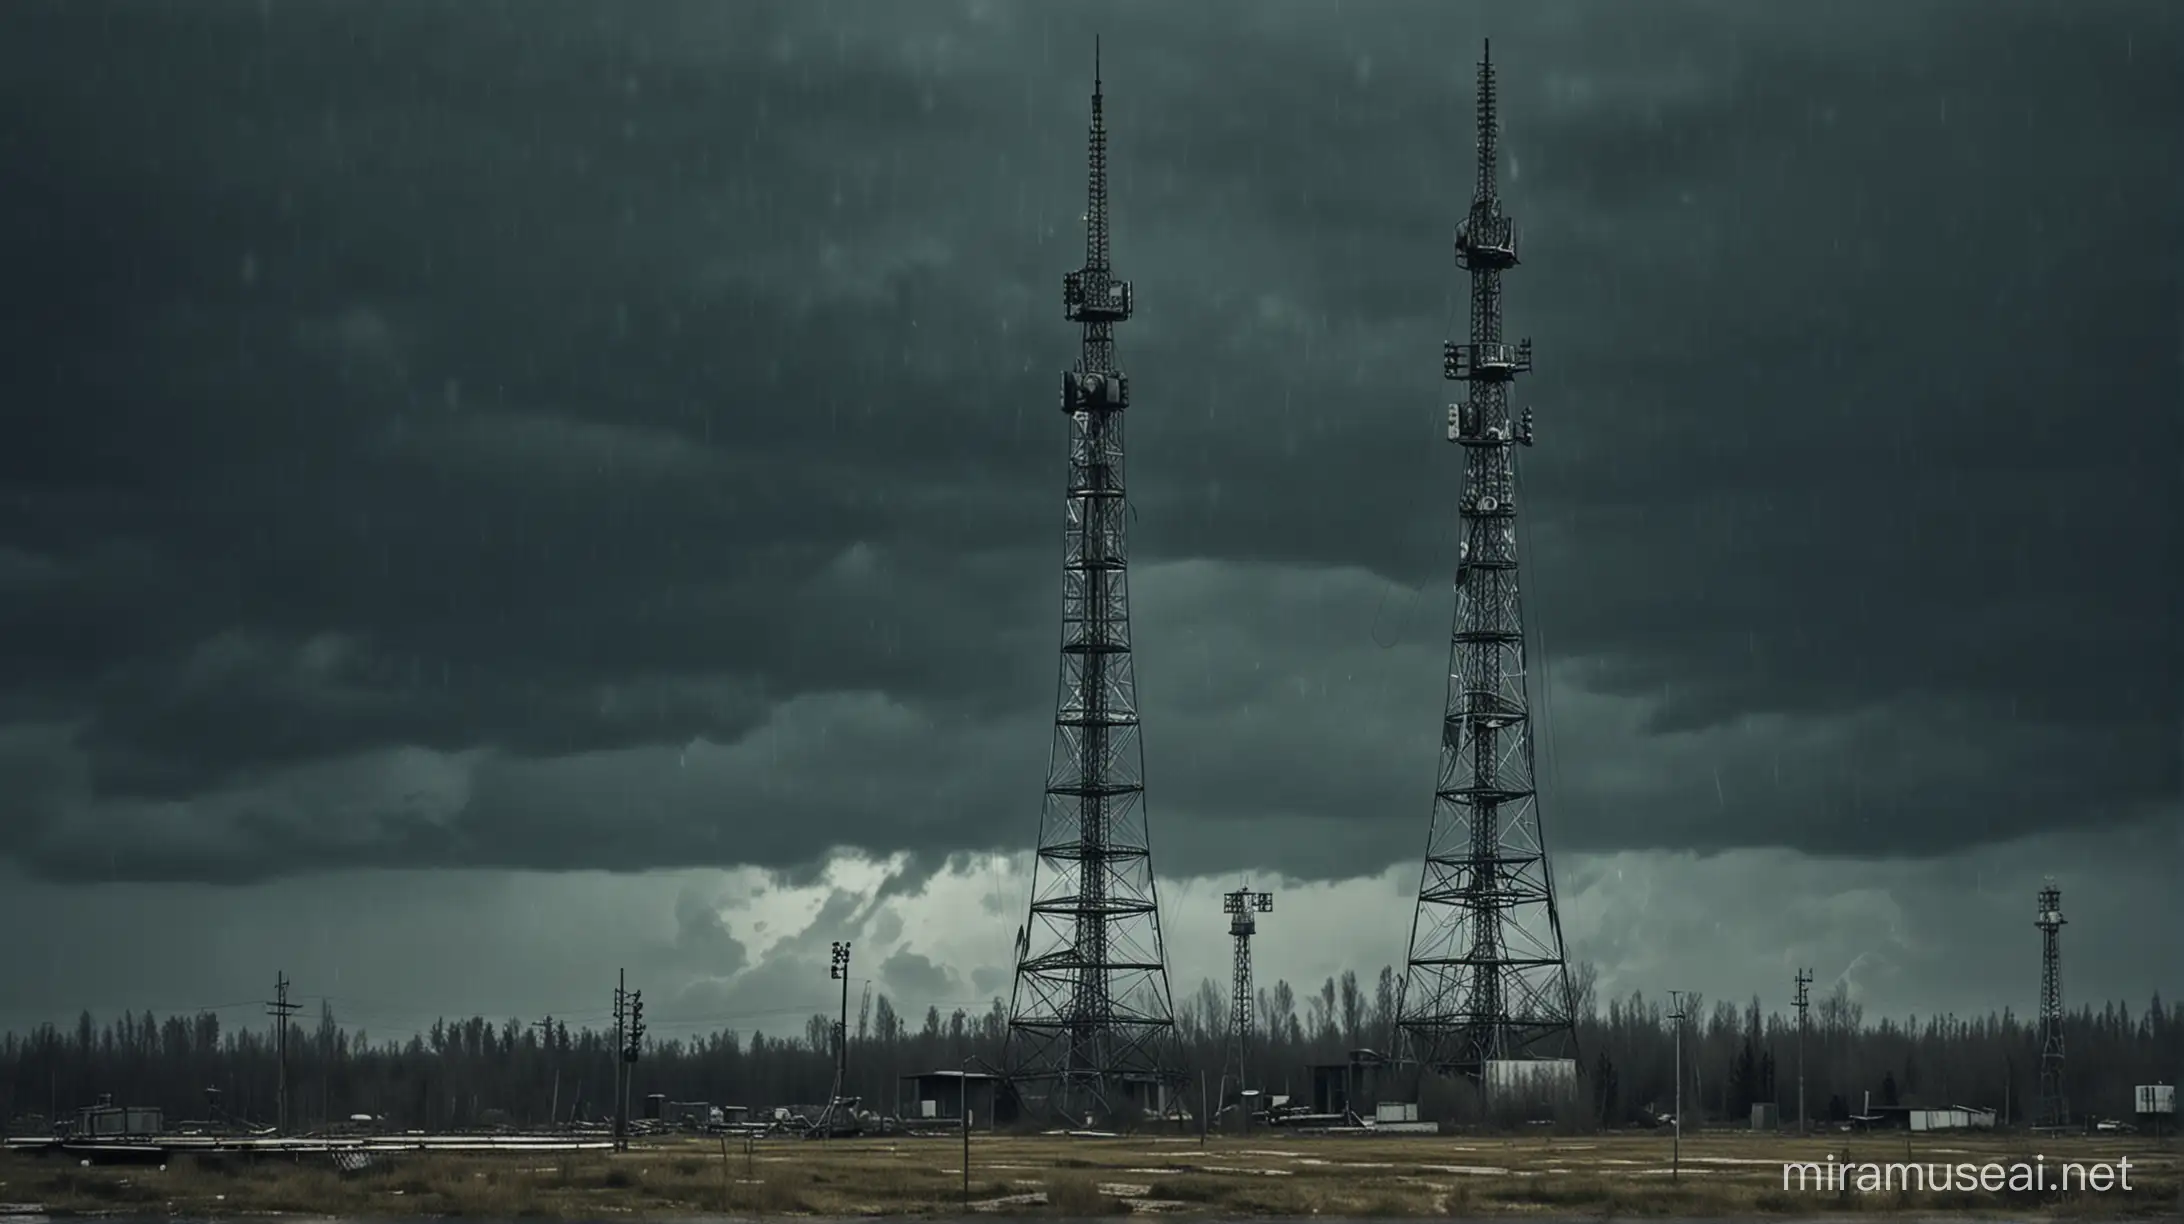 Abandoned Cold Warera Russian Radio Station under a Stormy Sky